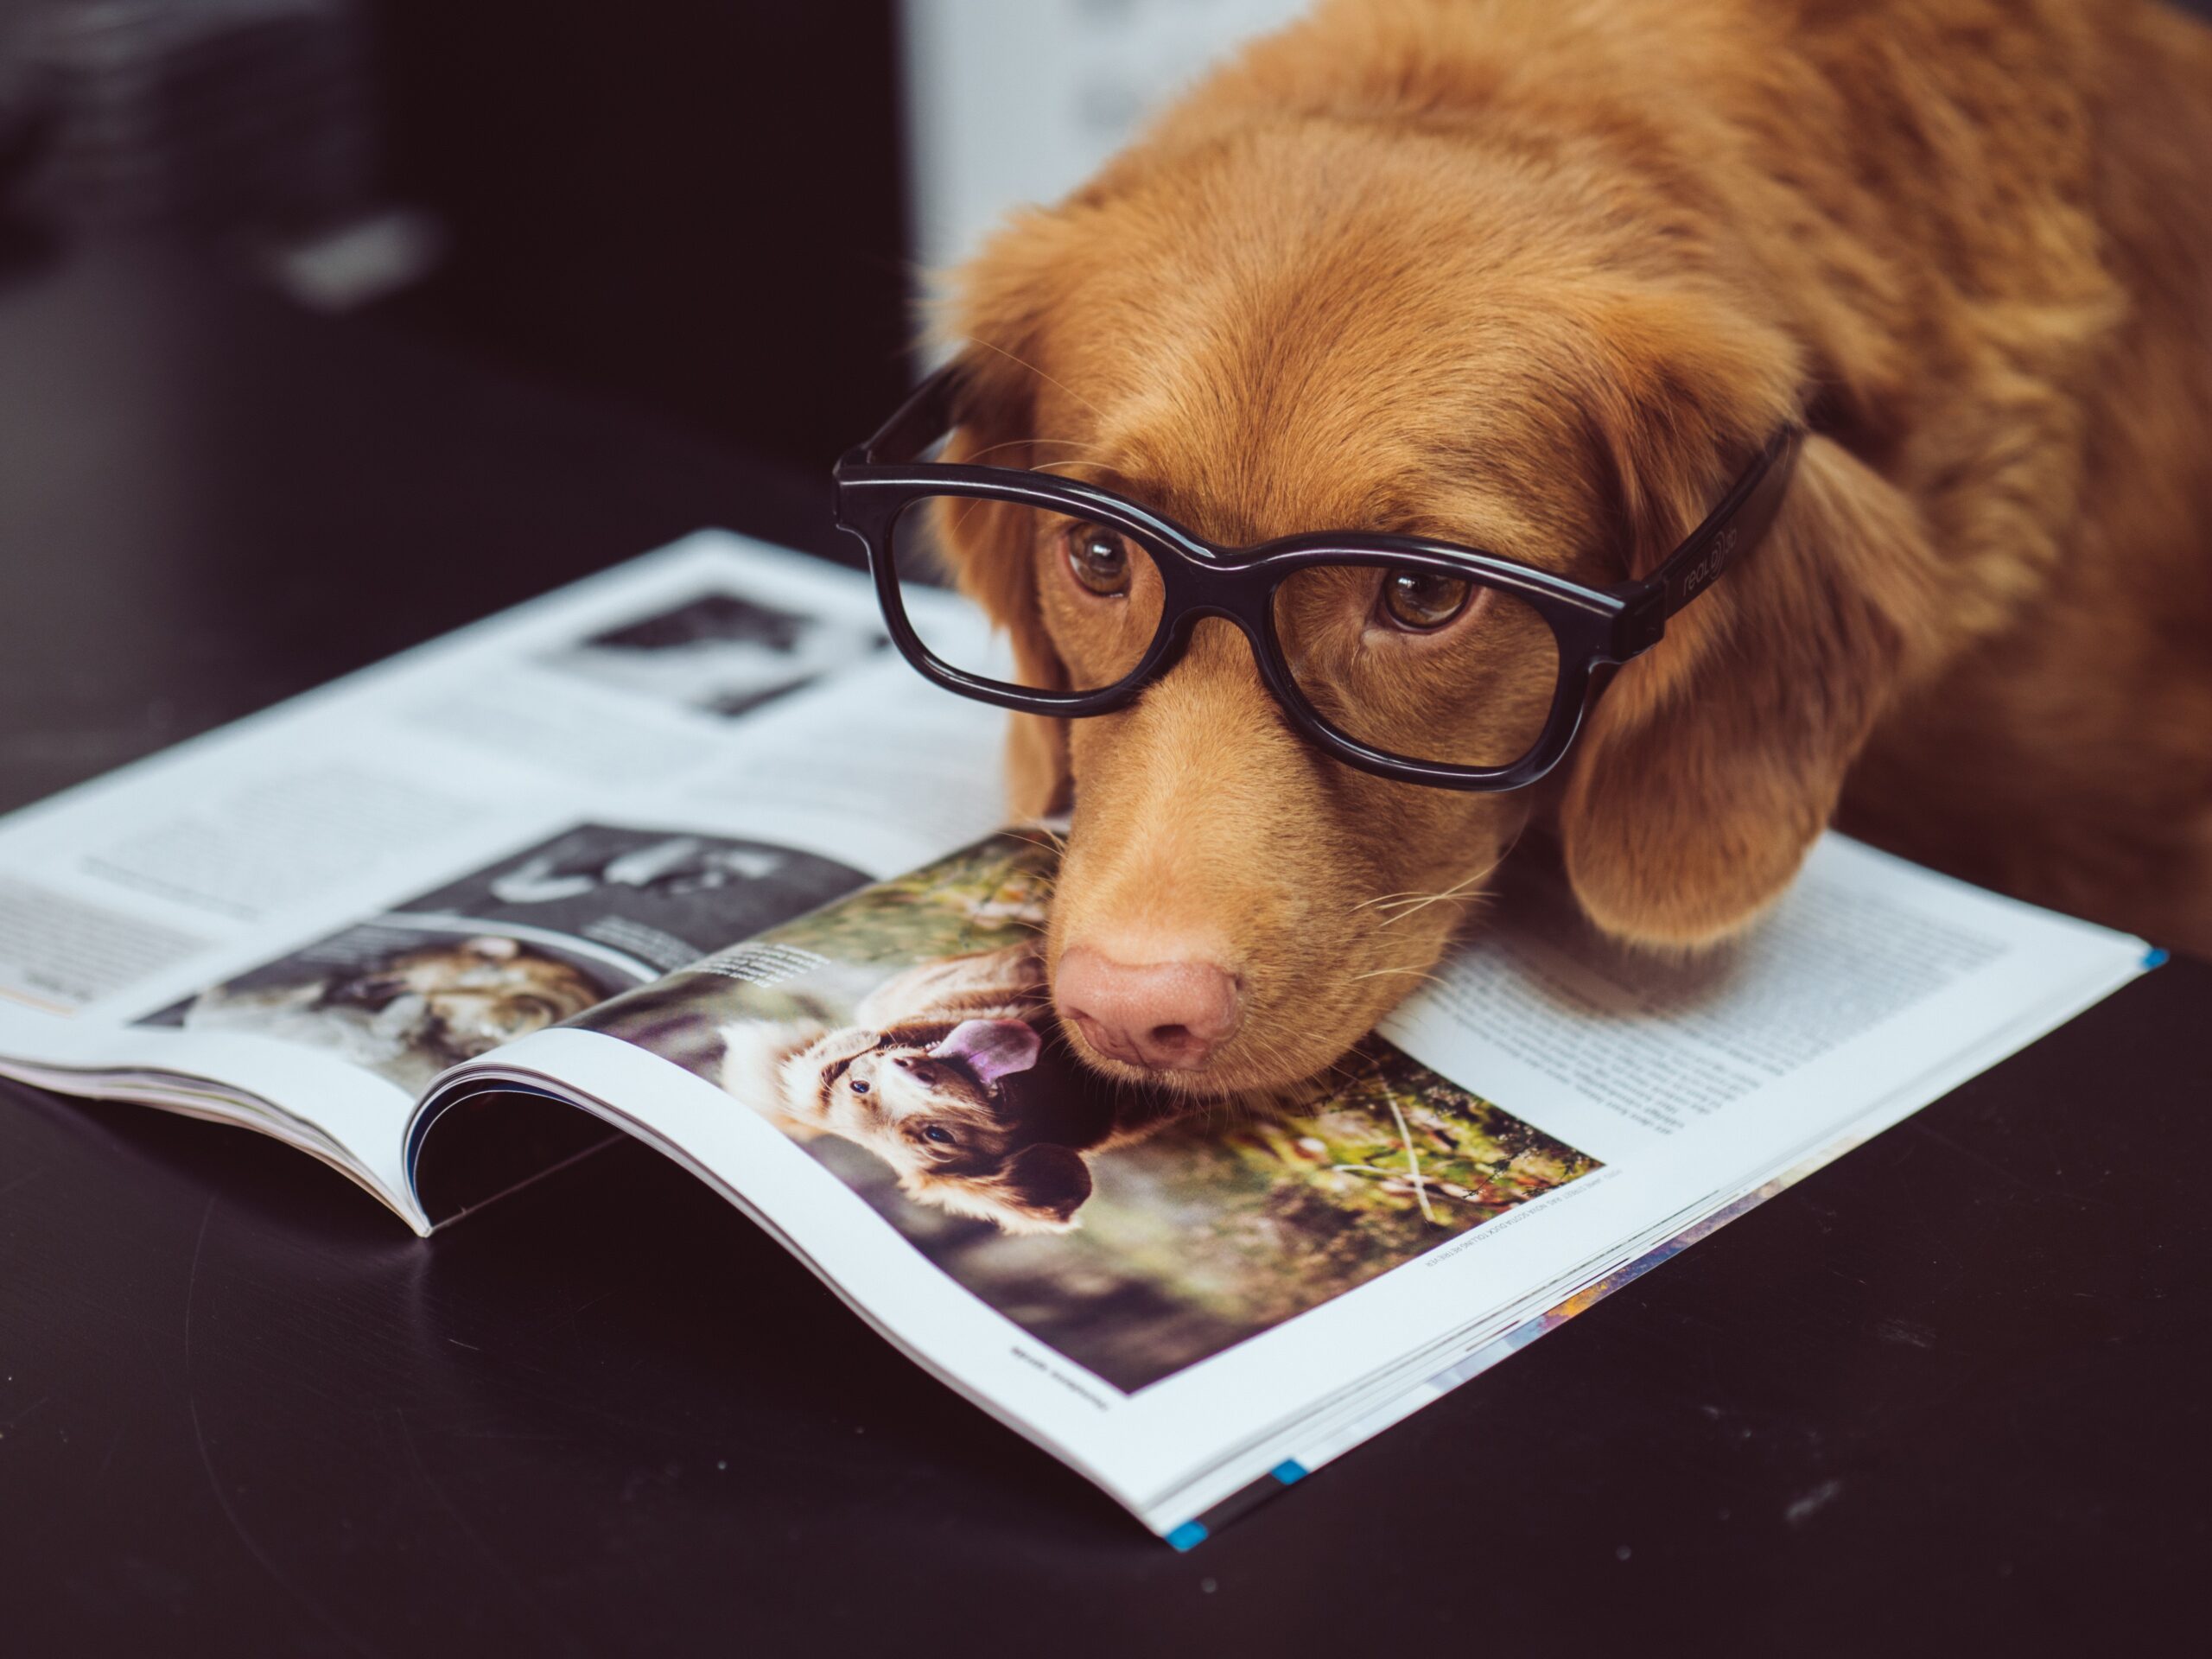 dog with glasses on laying on a magazine